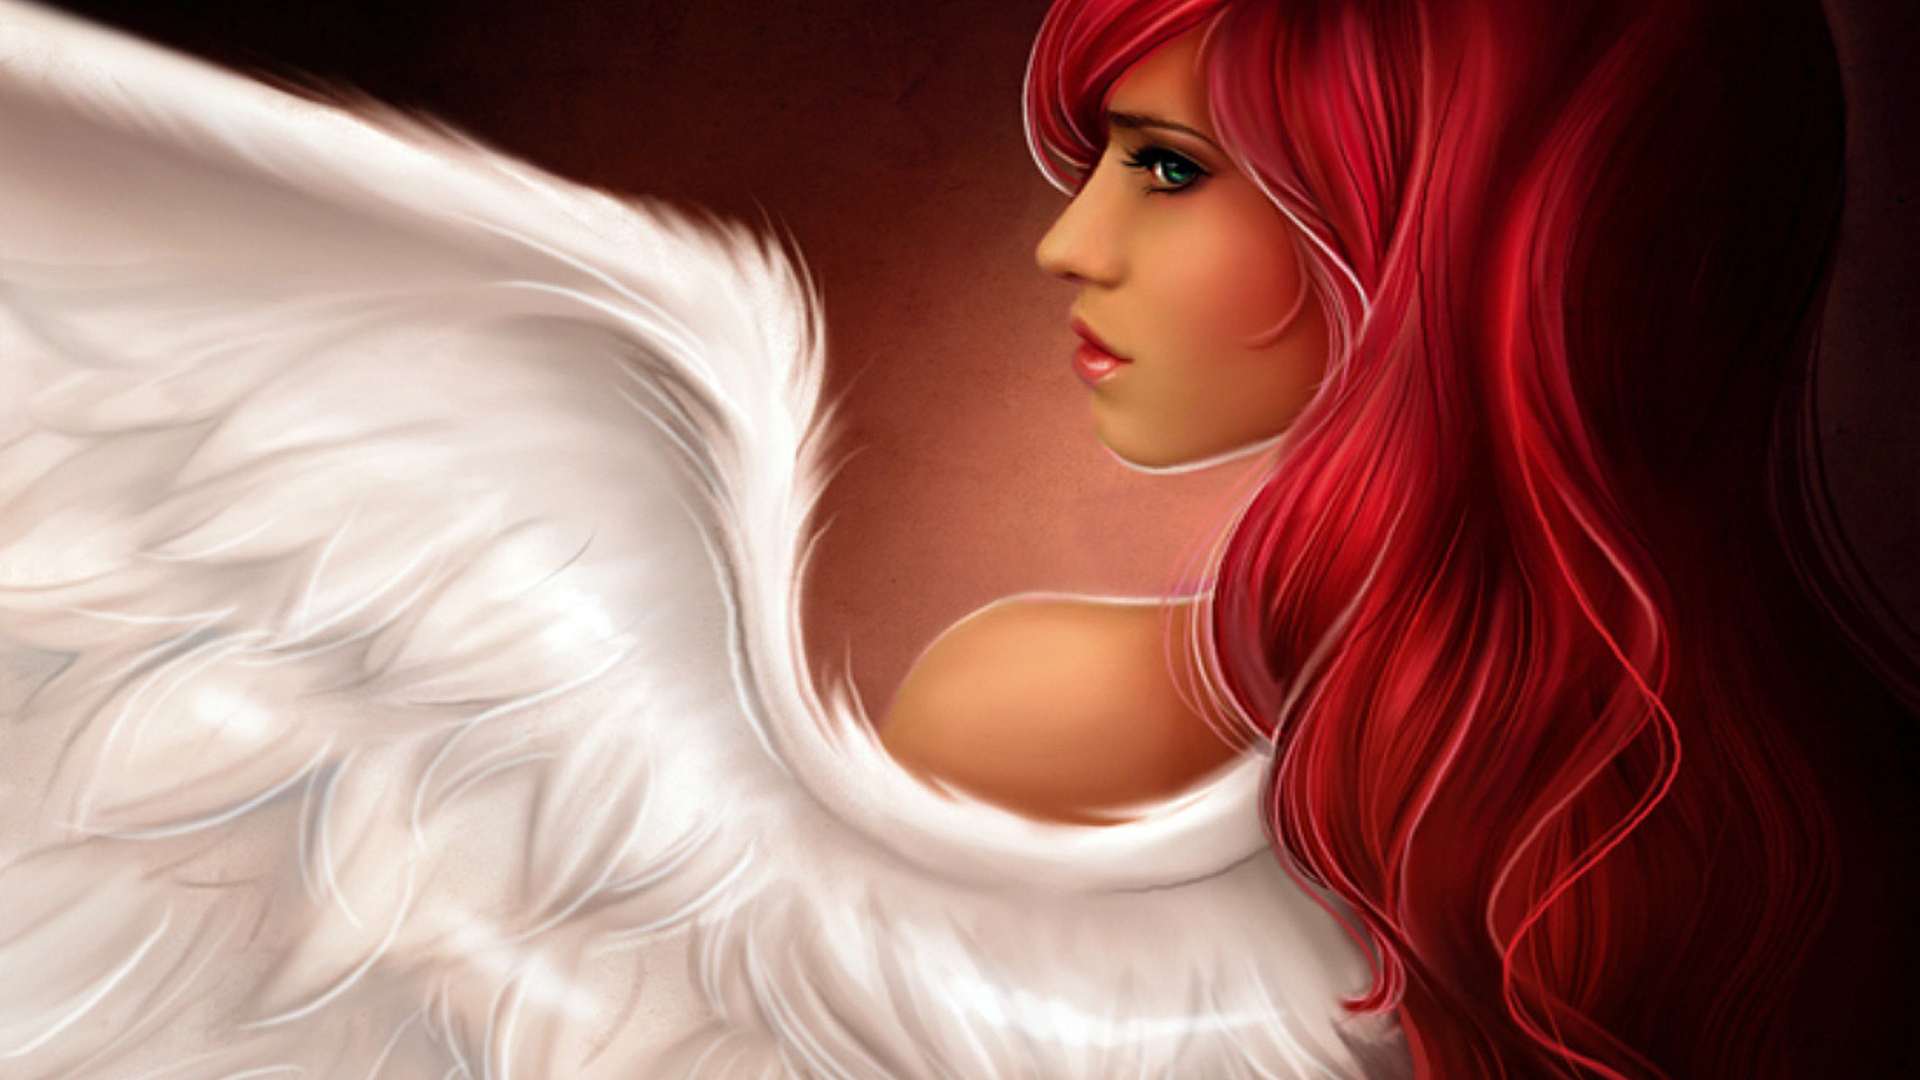 Angels - HD Wallpapers:Amazon.com.au:Appstore for Android